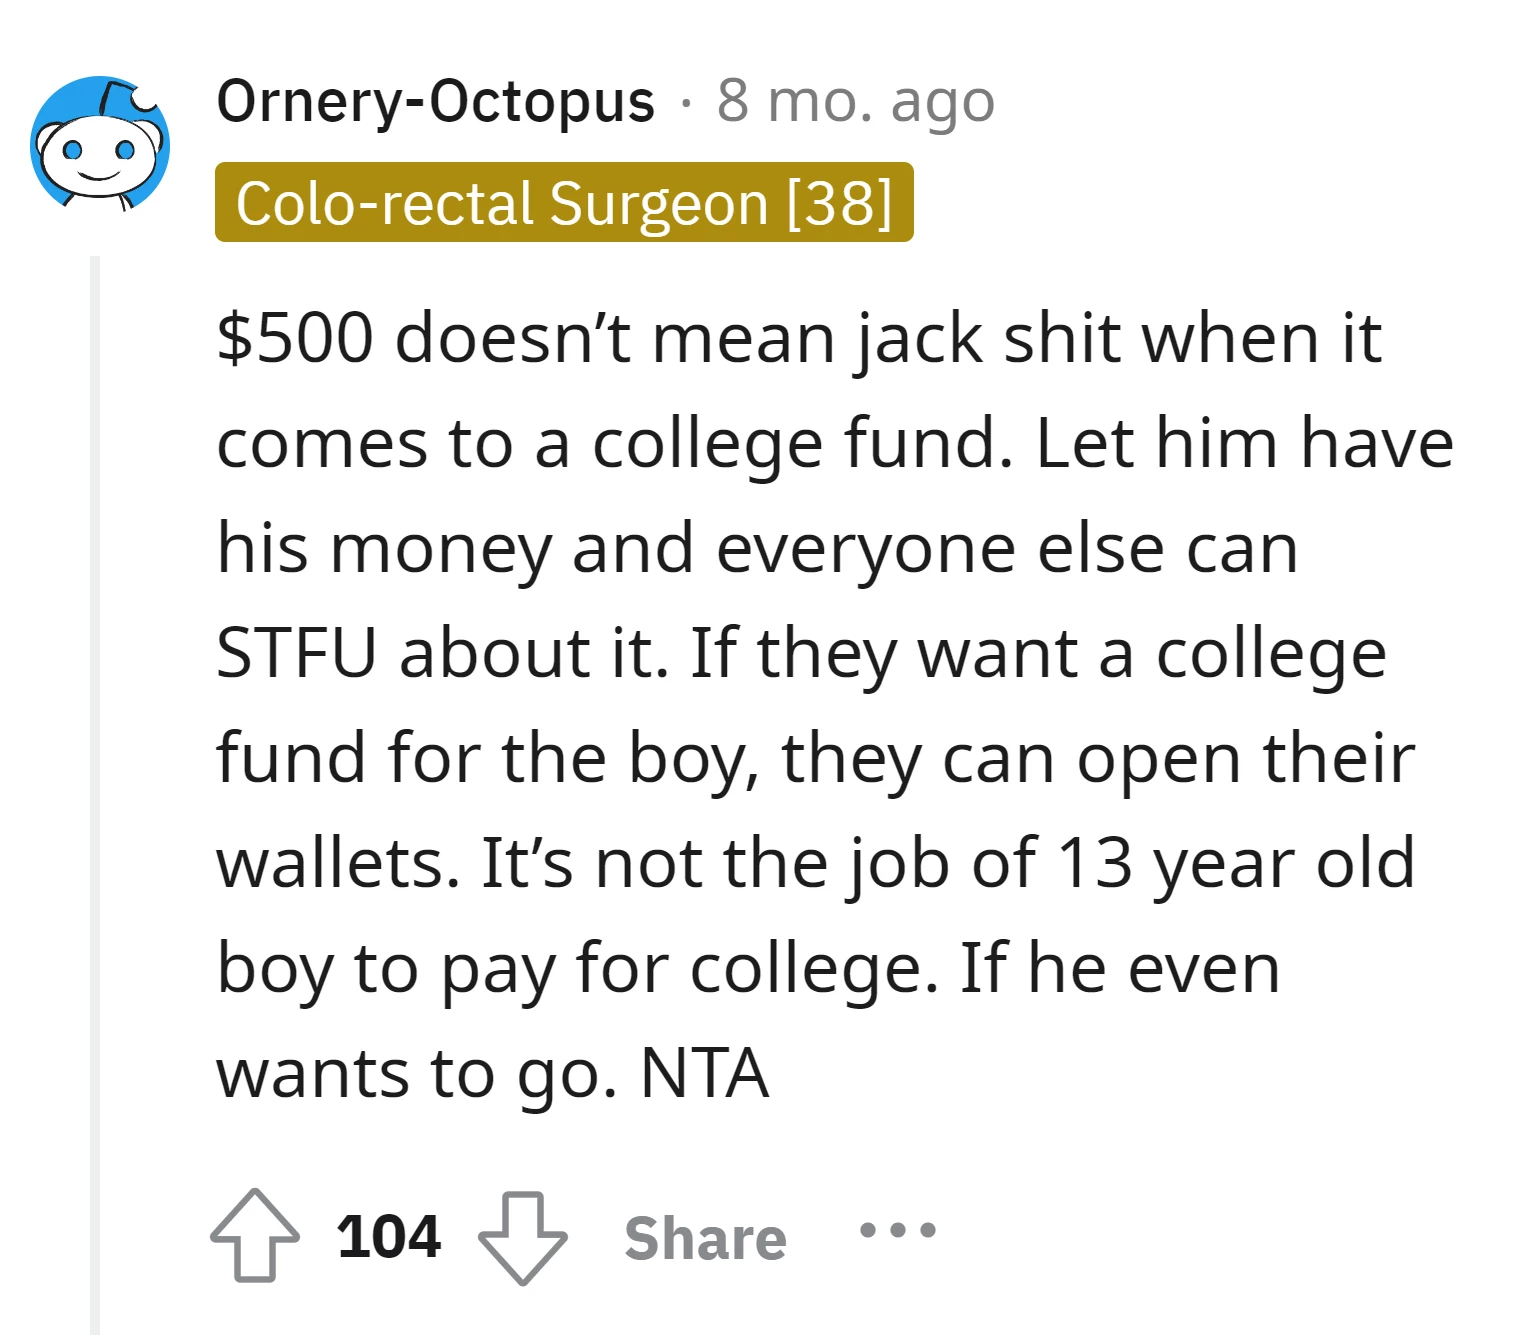 It's not the 13-year-old boy's responsibility to pay for college